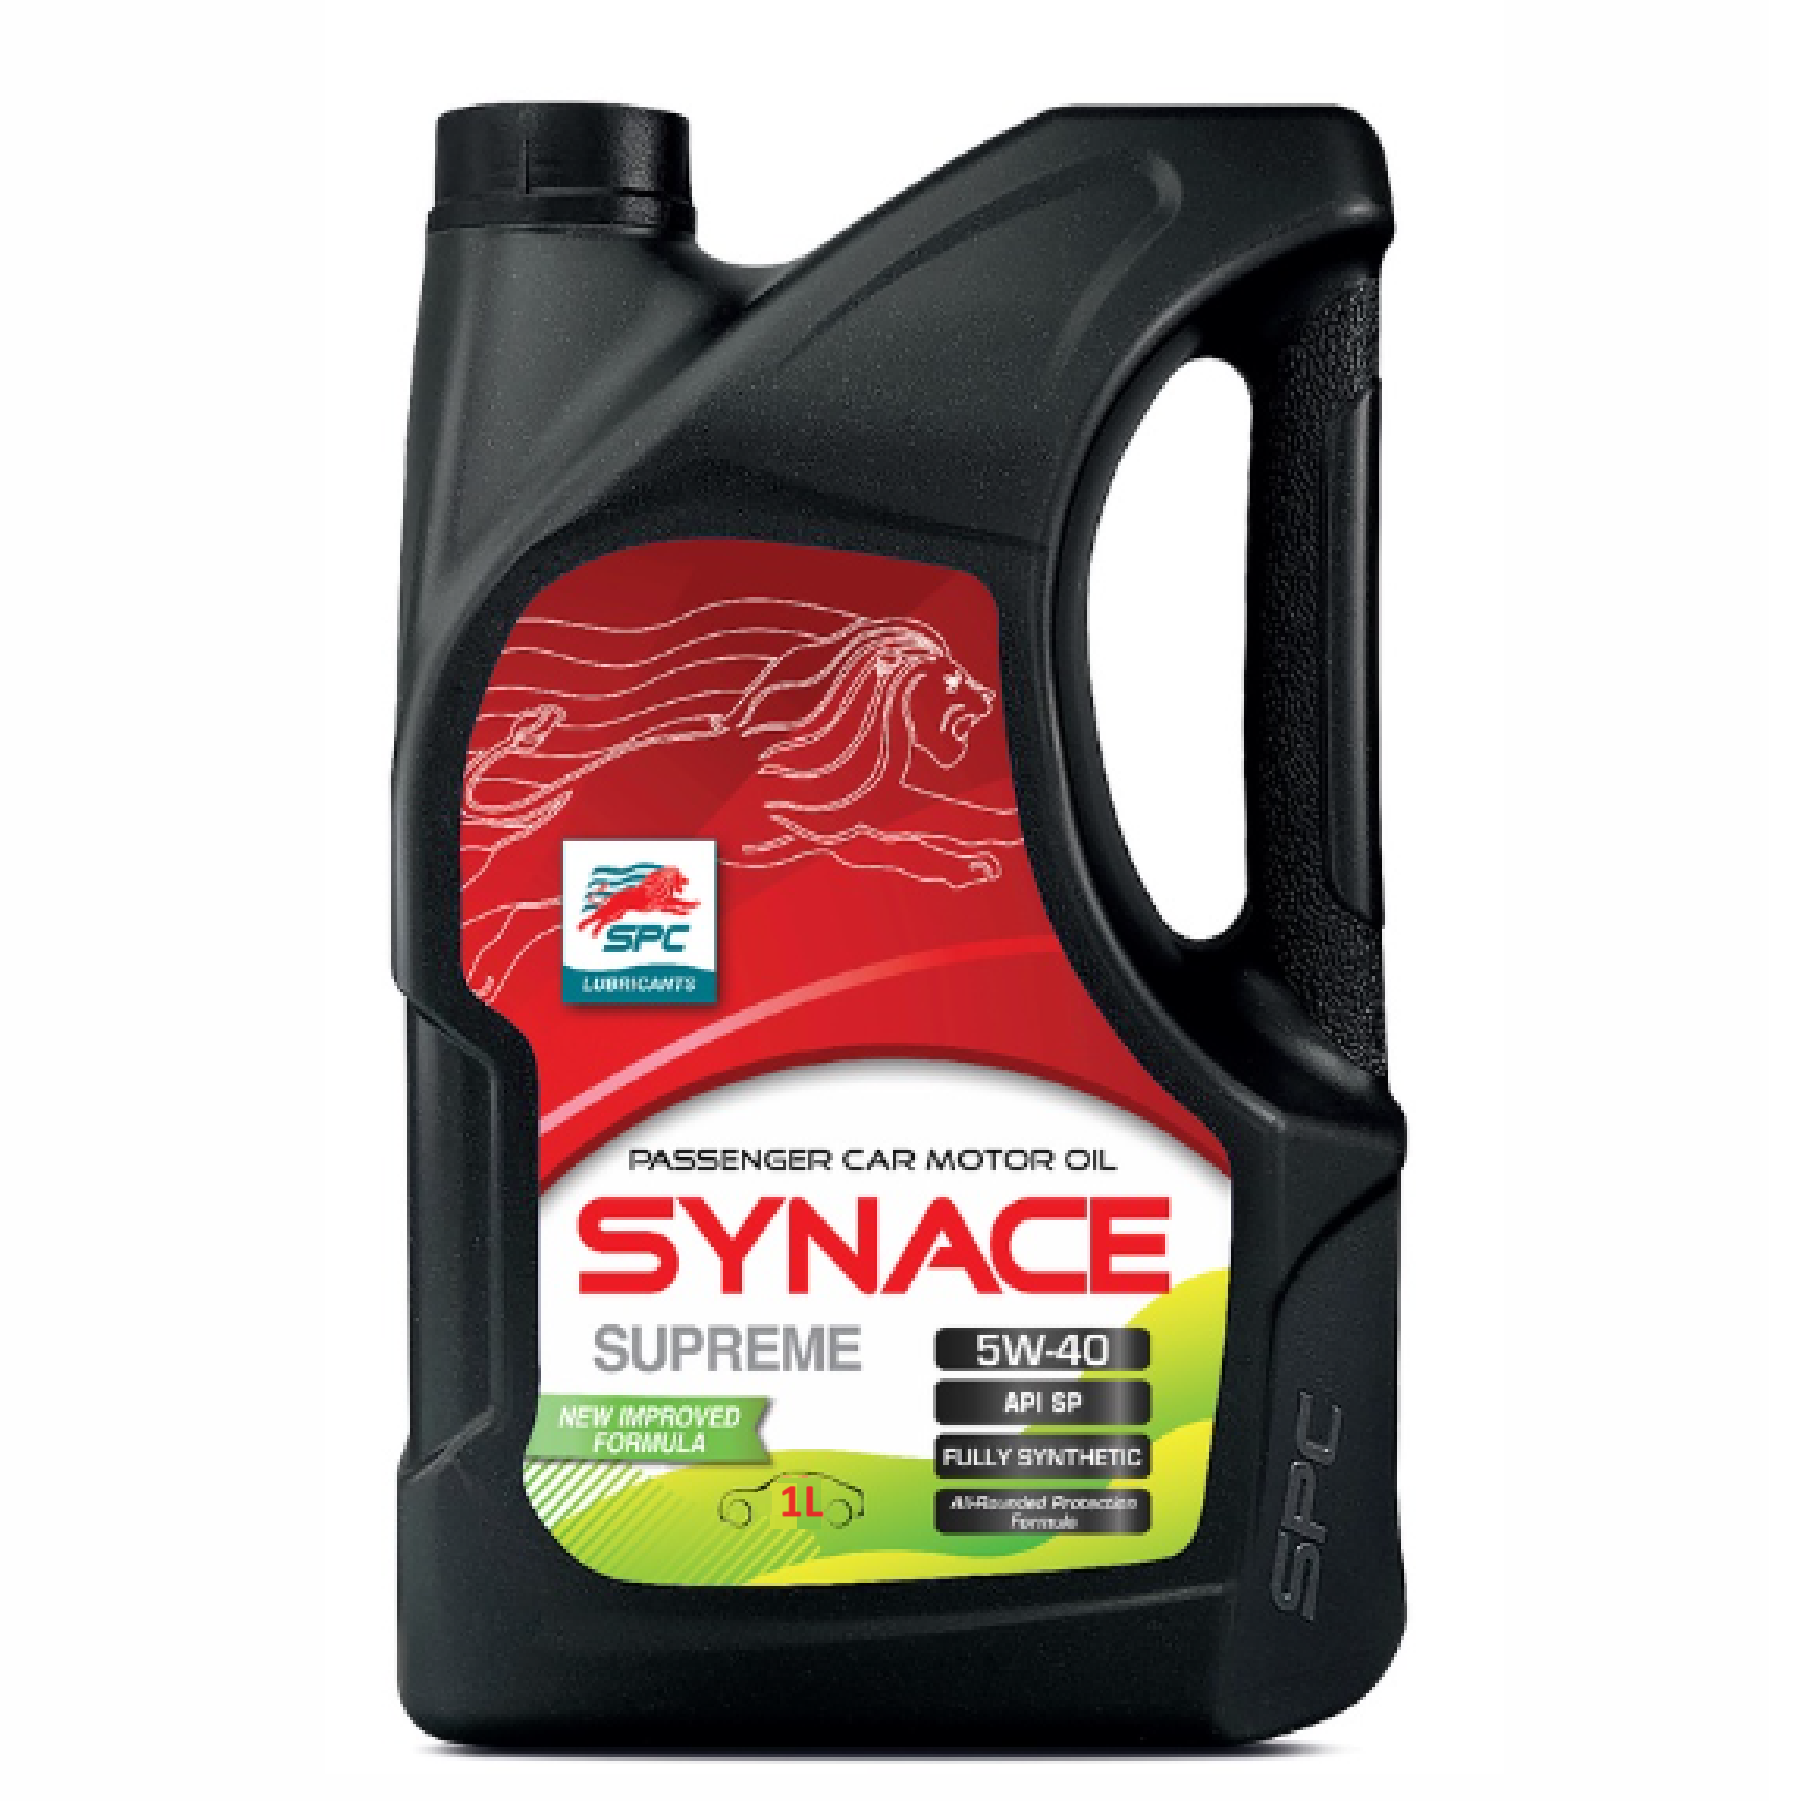 SPC LUBRICANTS SYNACE Supreme SP SAE 5W40 Fully Synthetic Oil PASSENGER CAR OIL